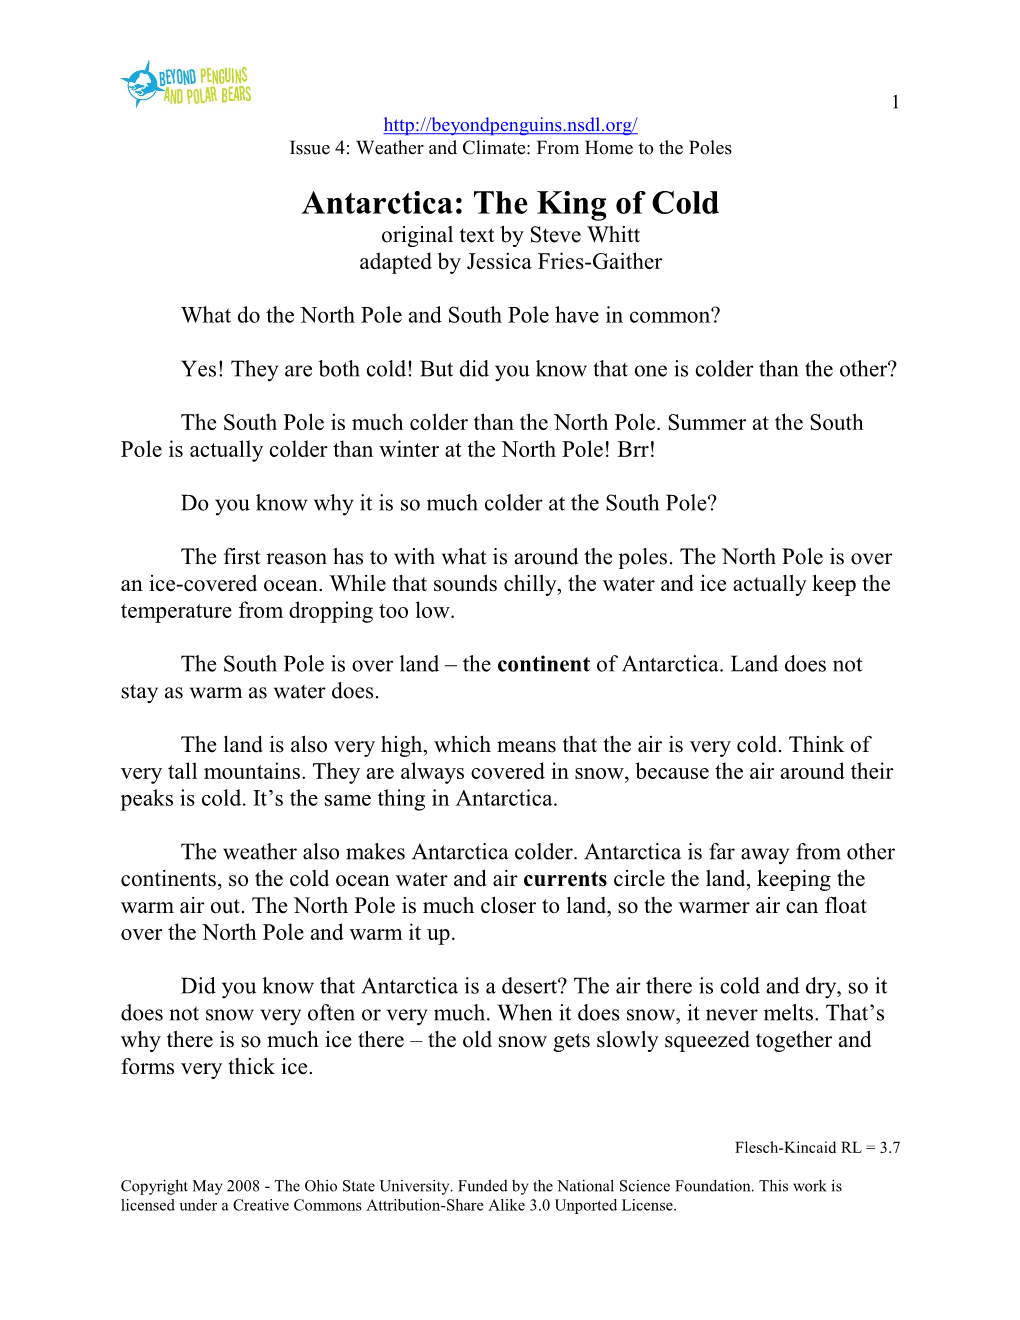 Antarctica: the King of Cold Original Text by Steve Whitt Adapted by Jessica Fries-Gaither